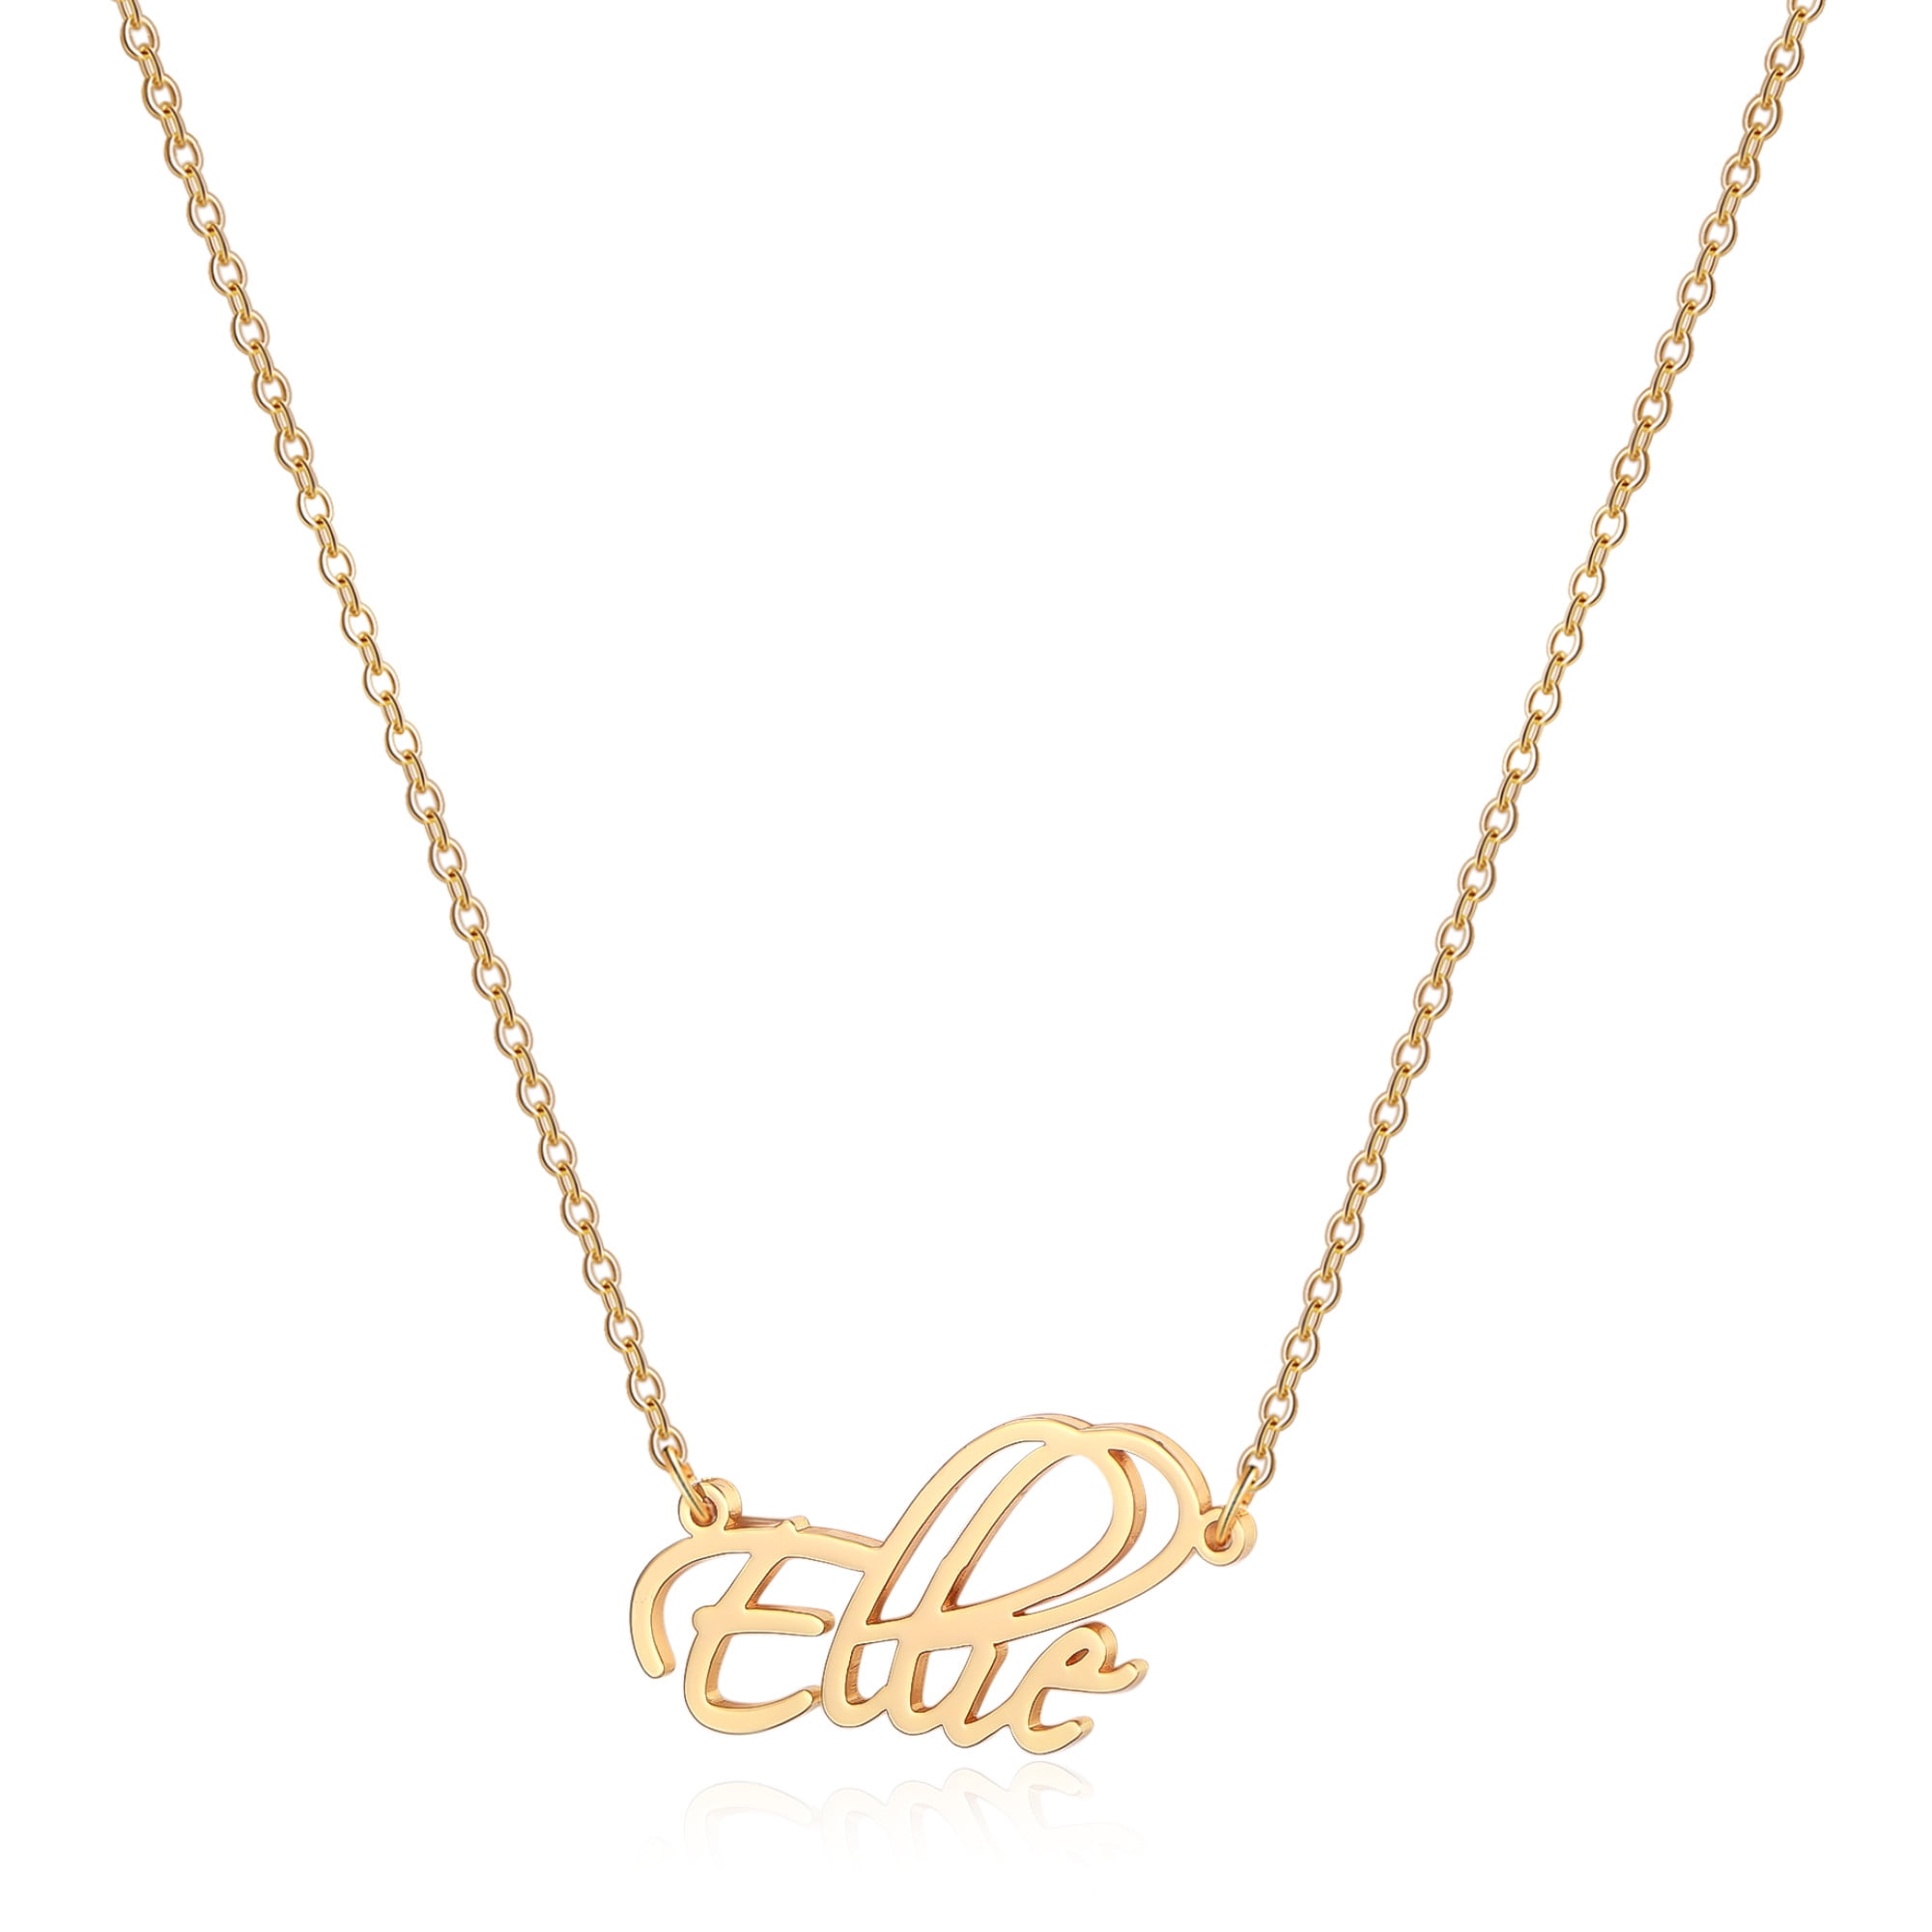 Personalized Cute Necklaces Nameplate Women 14 kt Gold Classic Name Necklace